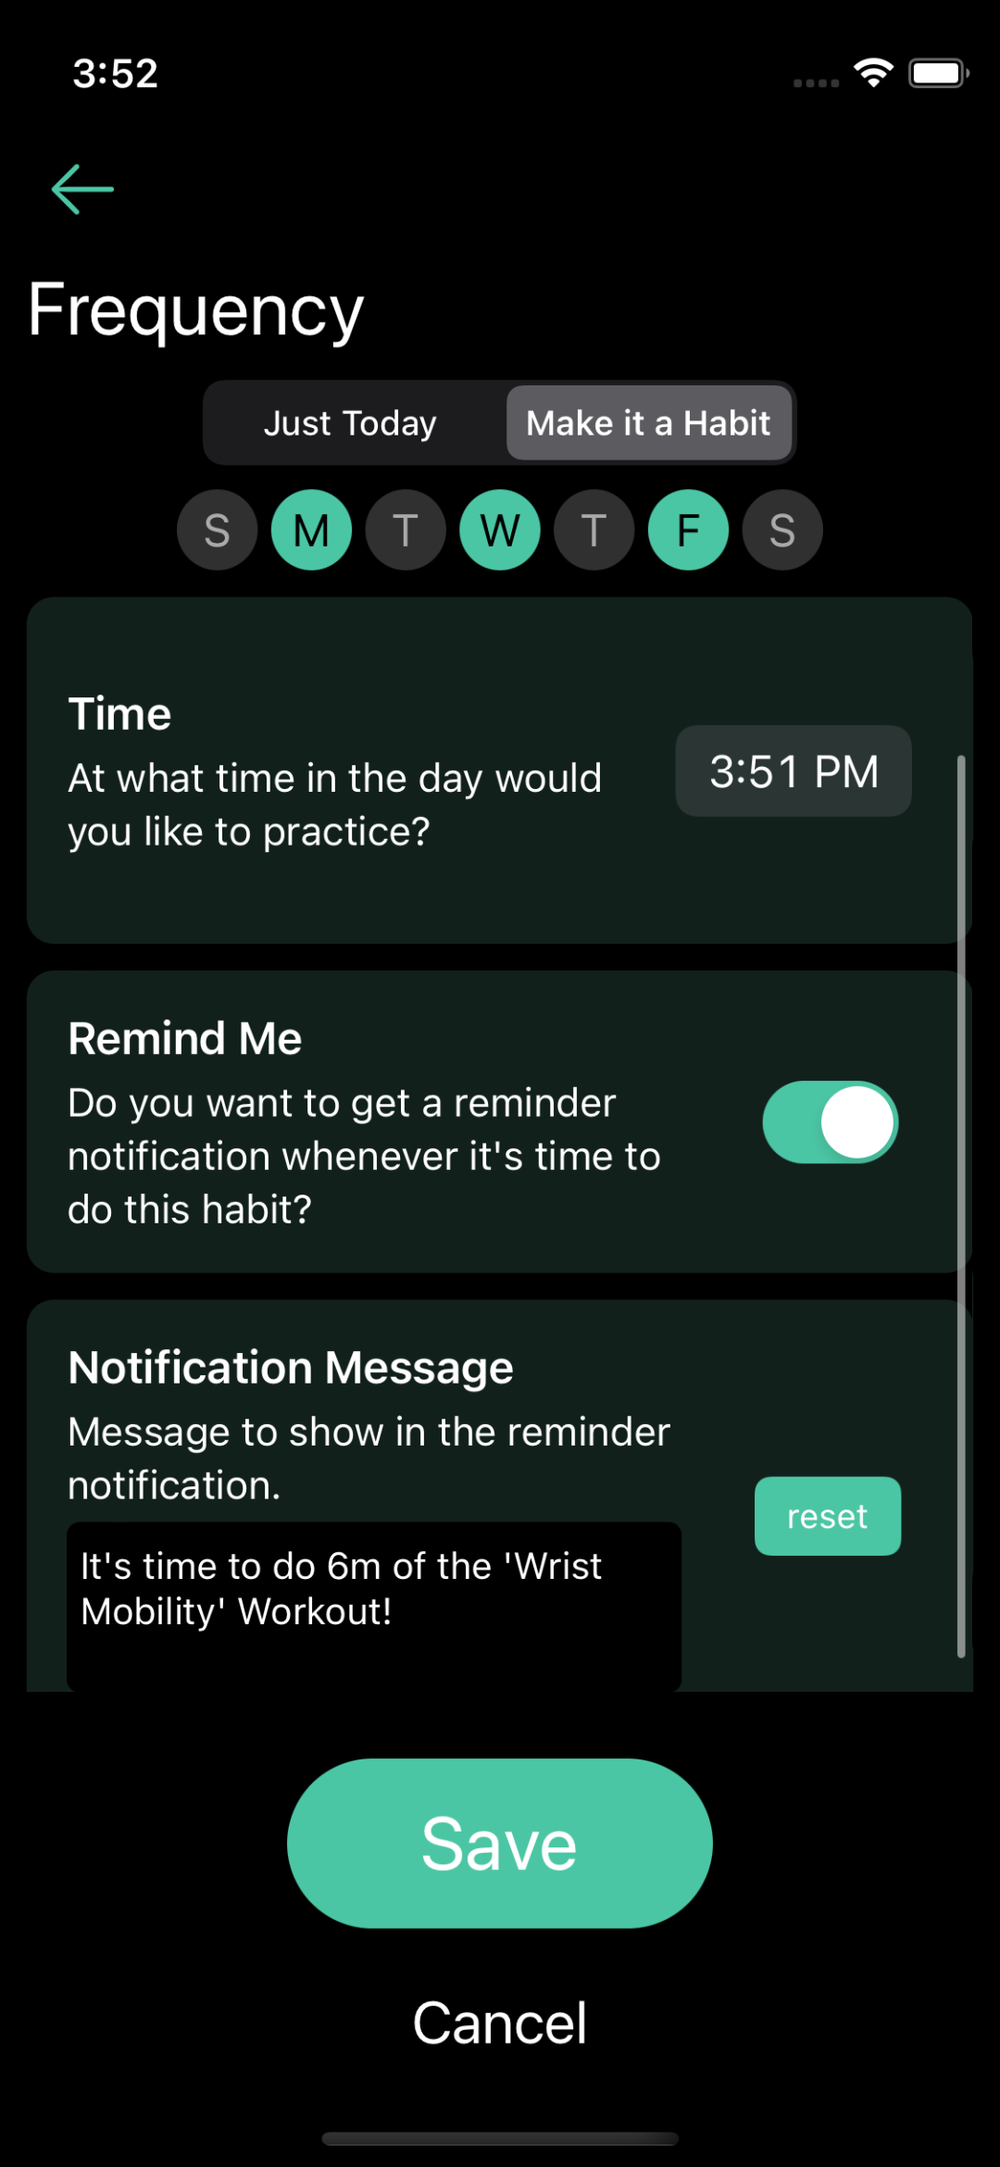 Make it obvious with time, schedule and reminder with custom message